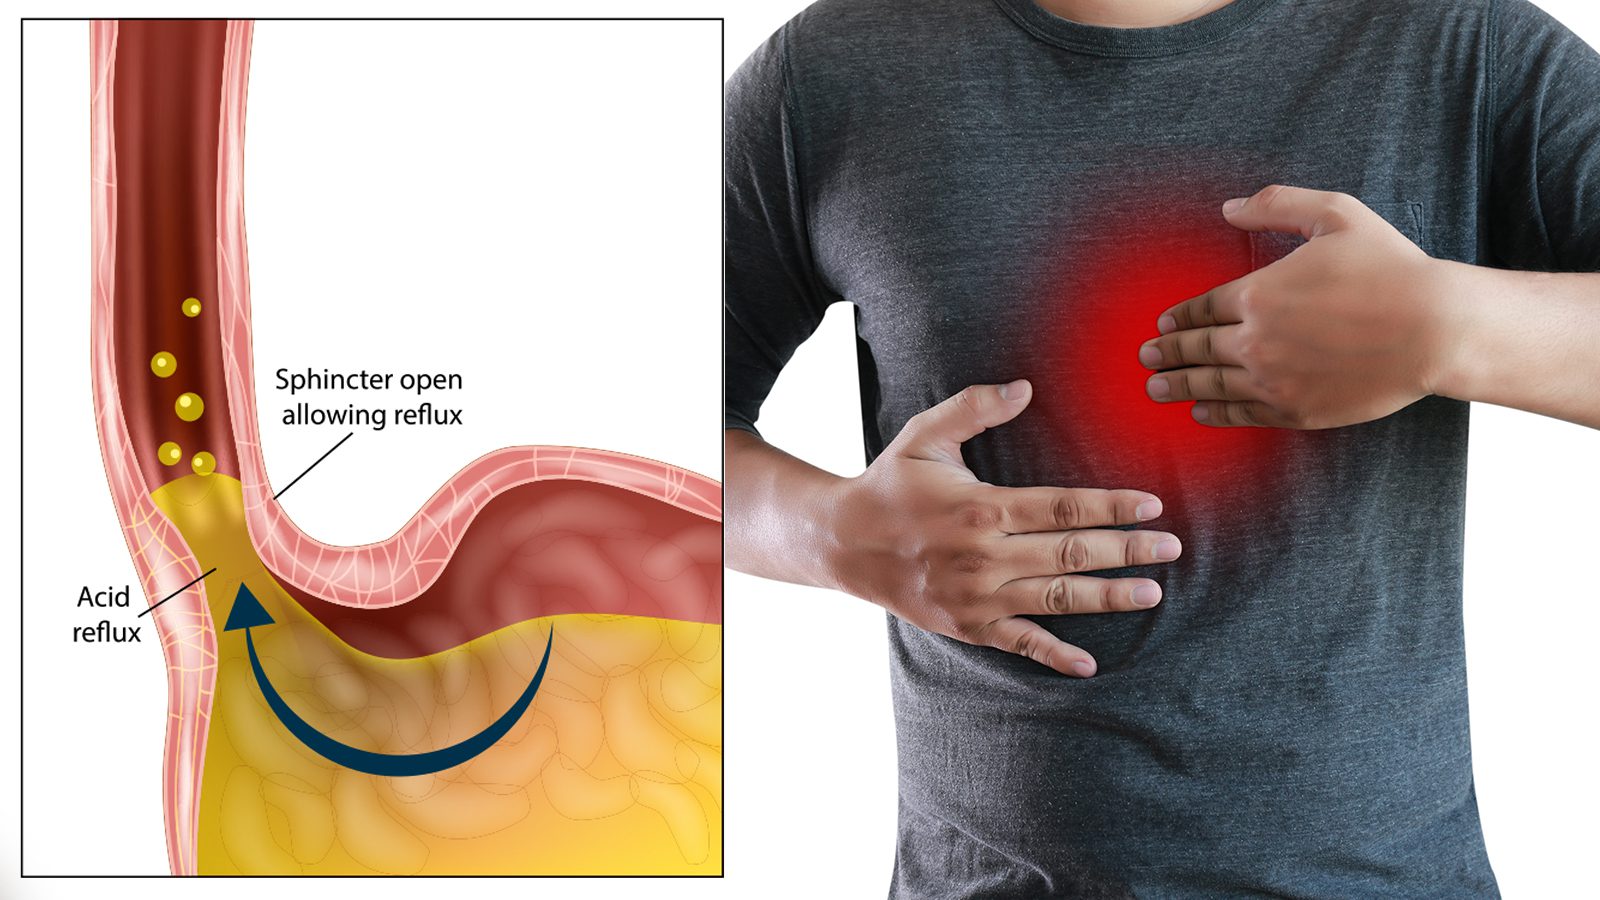 5 Things That Cause Acid Reflux (And How to Stop It)